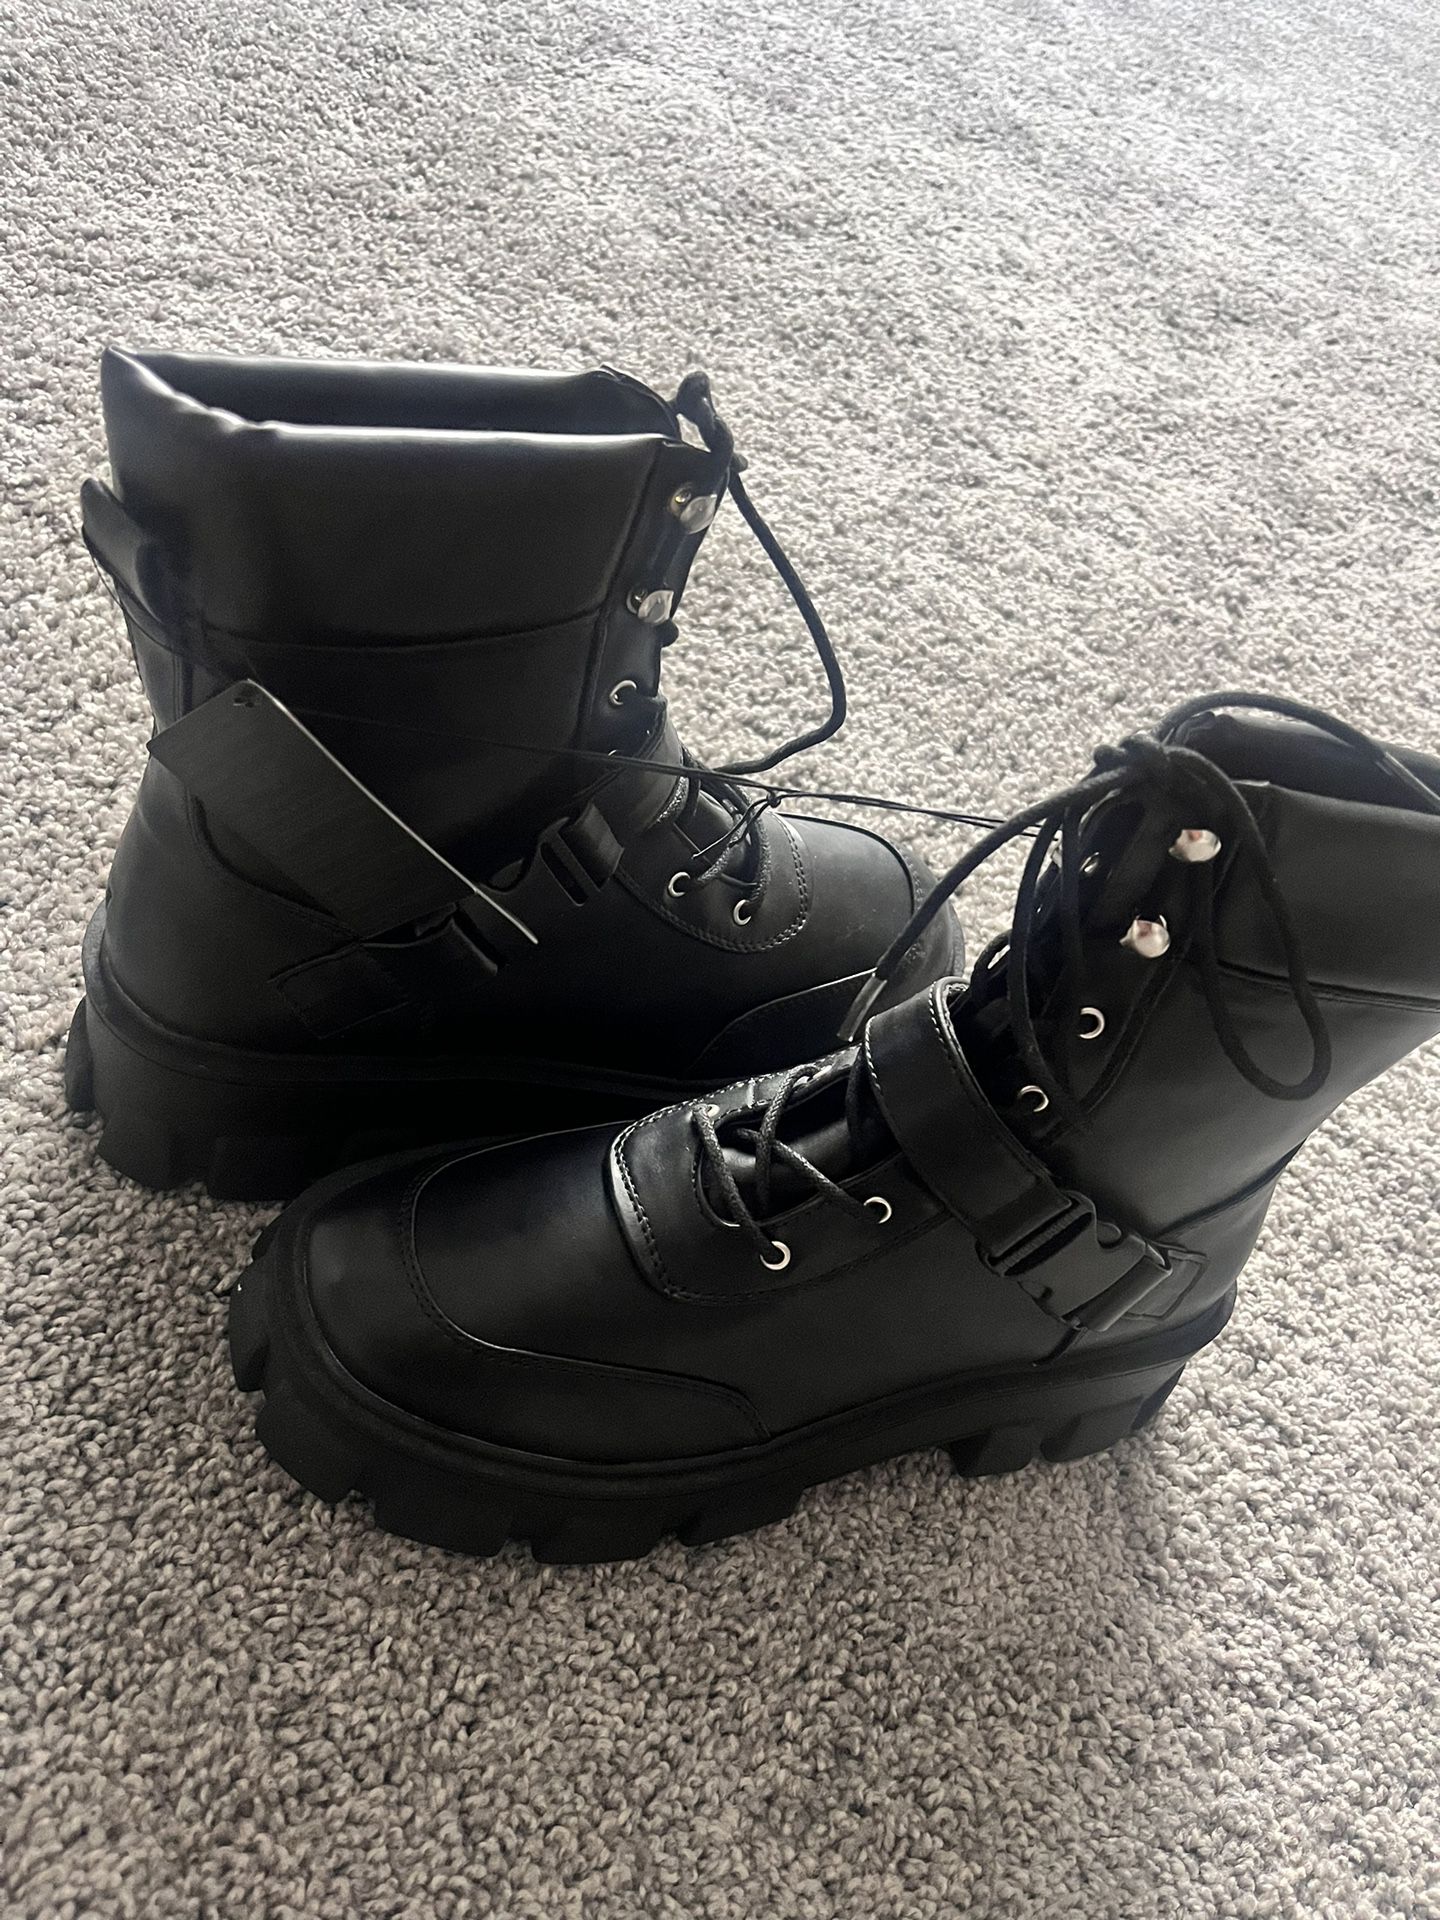 New With Tags Combat Boots